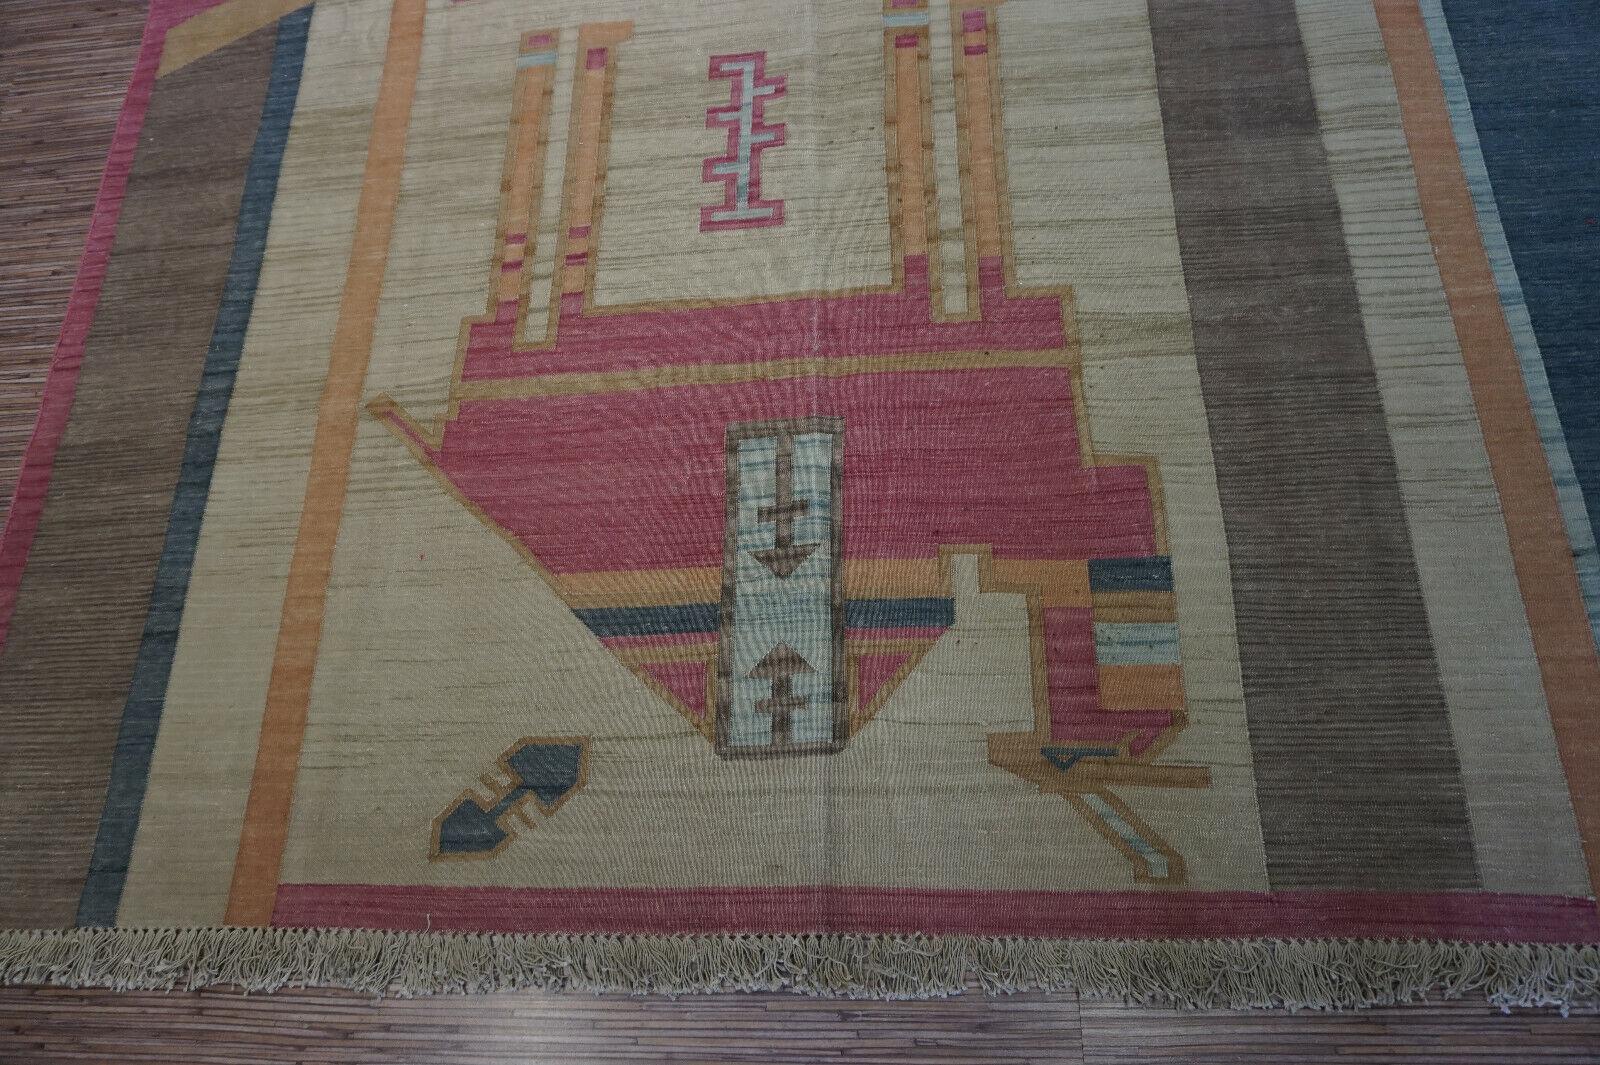 Late 20th Century Handmade Vintage Indian Dhurrie Kilim Rug 6.3' x 8.3', 1970s - 1D46 For Sale